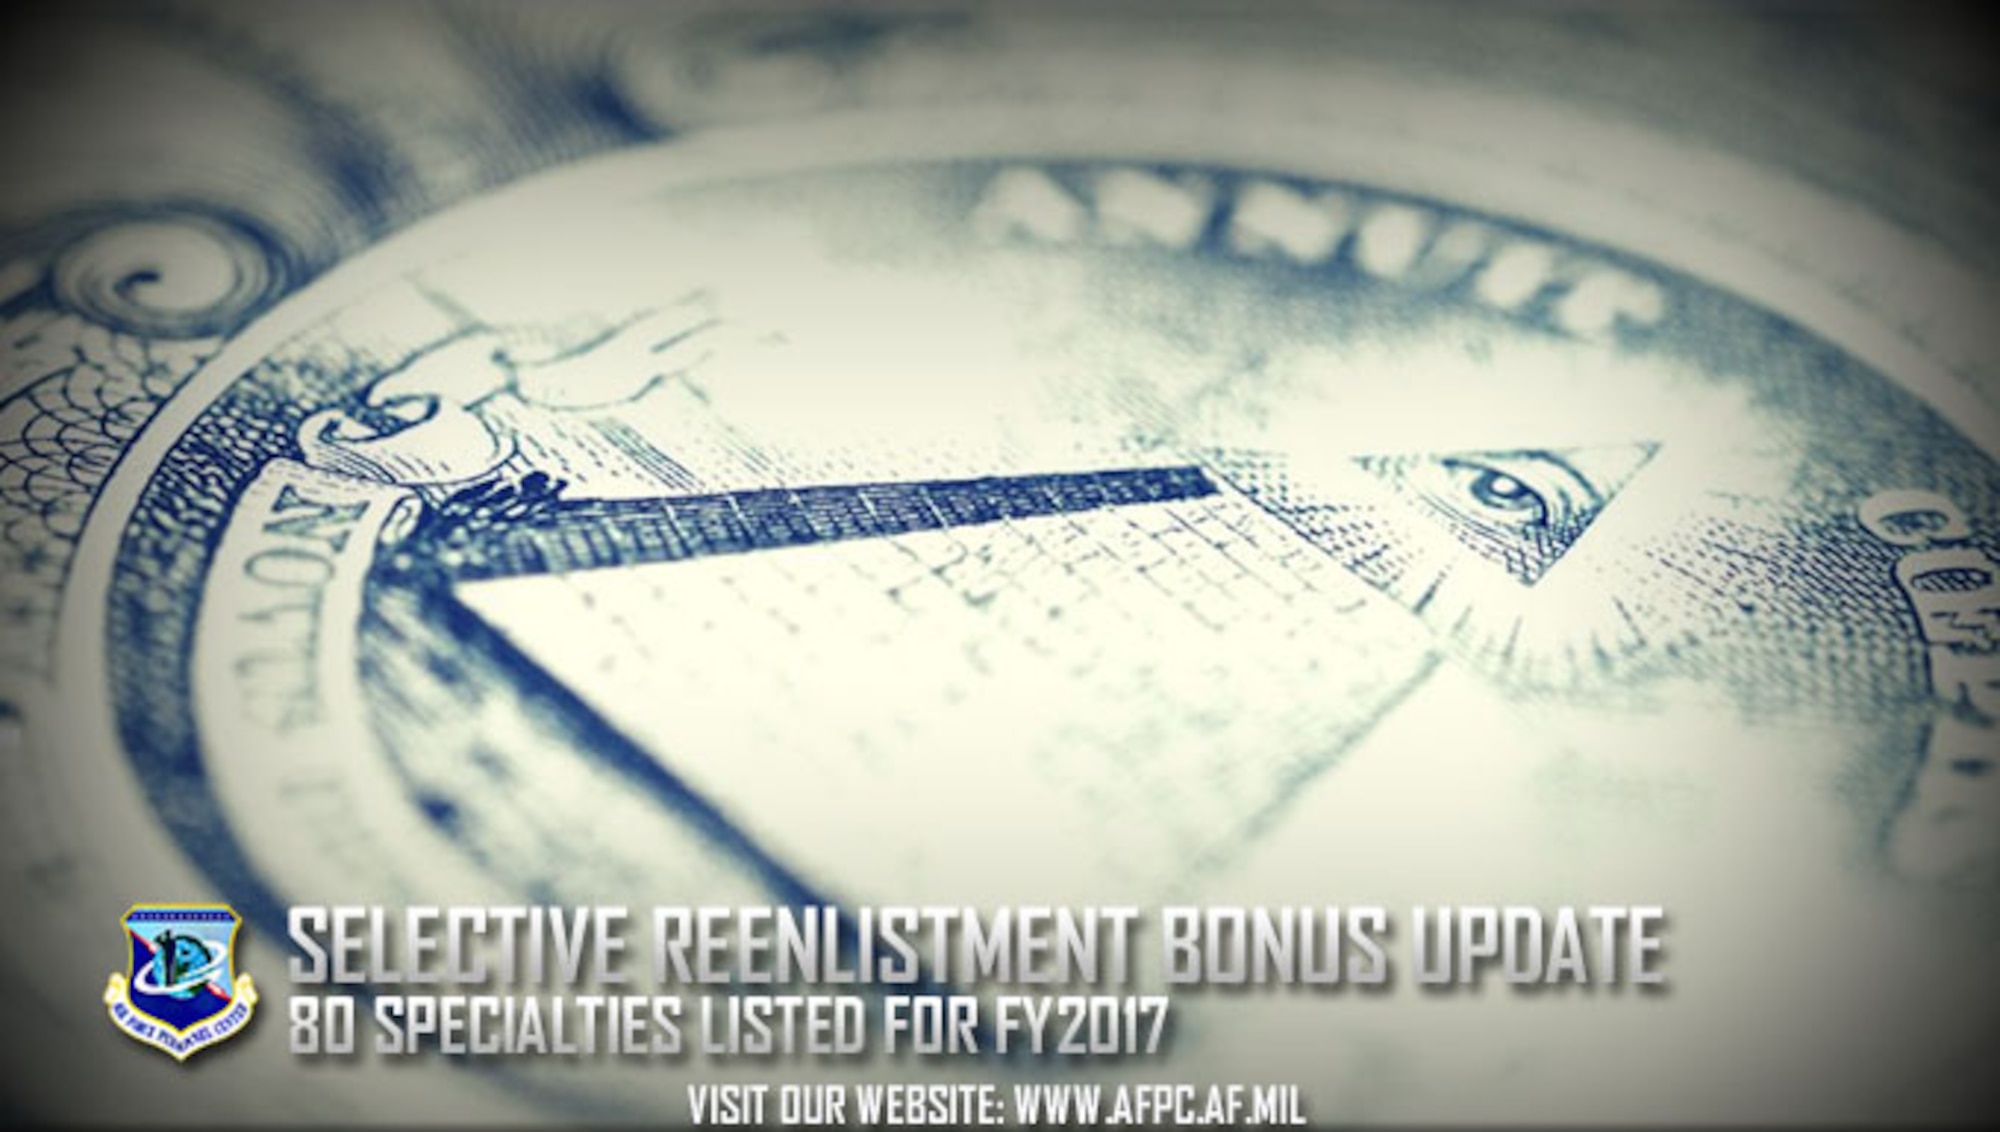 Air Force officials released details on the fiscal year 2017 Selective Re-enlistment Bonus program Feb. 23, 2017. This year’s program consists of 80 Air Force specialties and continues the practice of offering larger sums of money initially up front. (U.S. Air Force graphic by Kat Bailey)